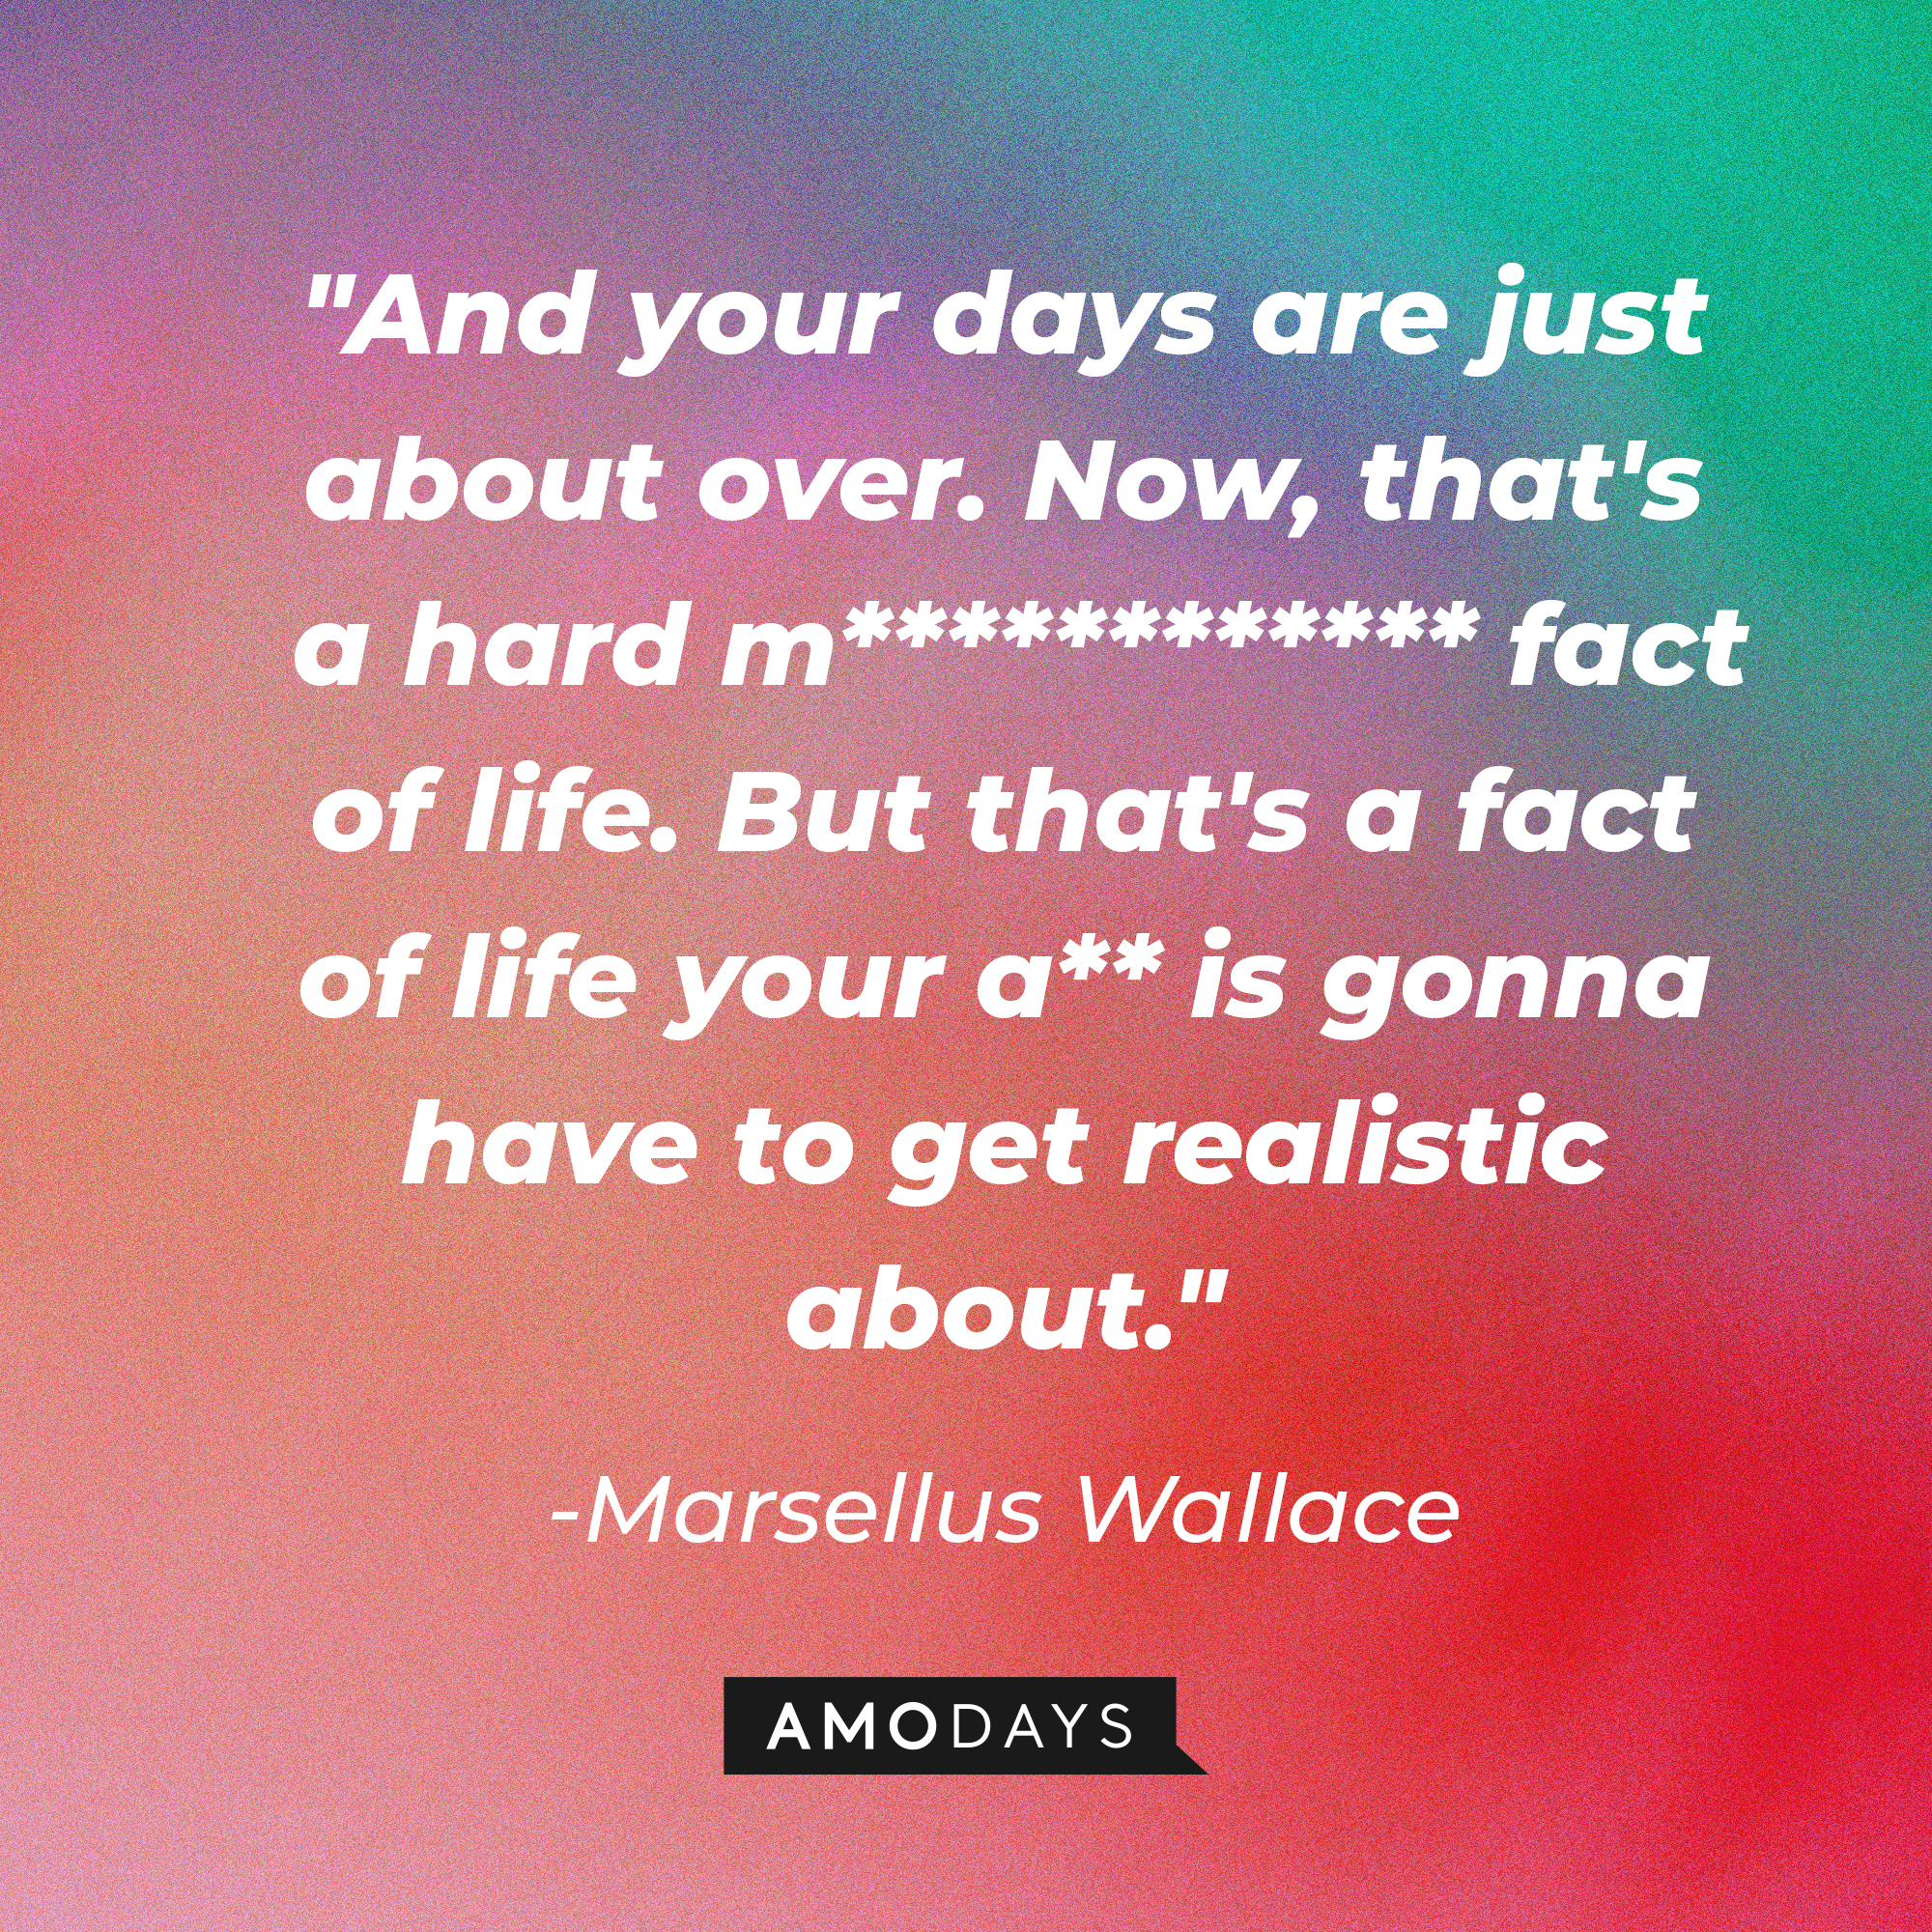 Marsellus Wallace's quote: "And your days are just about over. Now, that's a hard m************ fact of life. But that's a fact of life your a** is gonna have to get realistic about." | Source: AmoDays